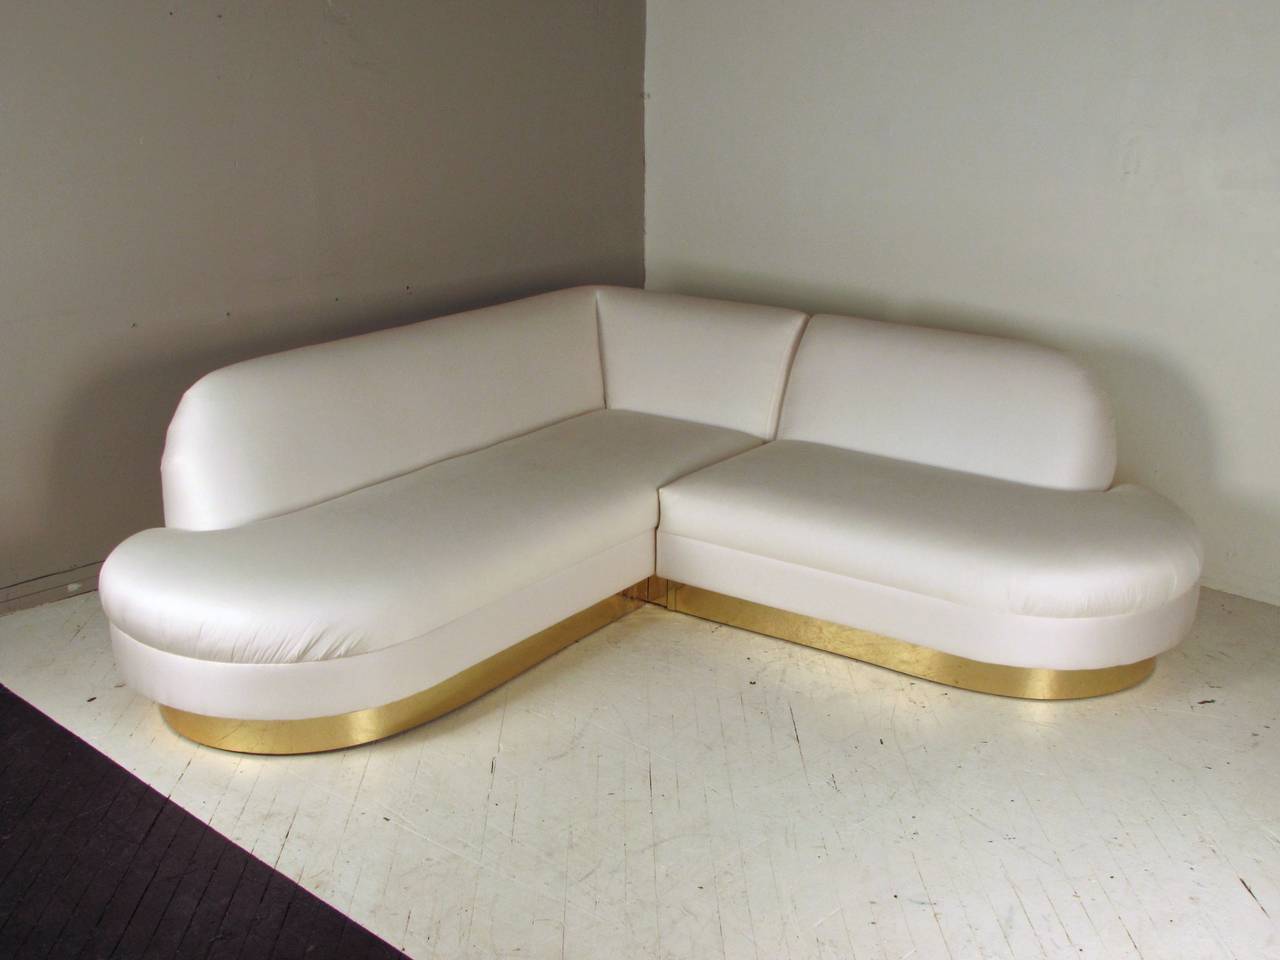 A rare and glamorous two-piece sofa by Adrian Pearsall for Comfort Designs, Inc. reminiscent of the work of Vladimir Kagan, Milo Baughman and Karl Springer. This is a very unusual shape for Adrian Pearsall who is widely known for his Gondola sofas